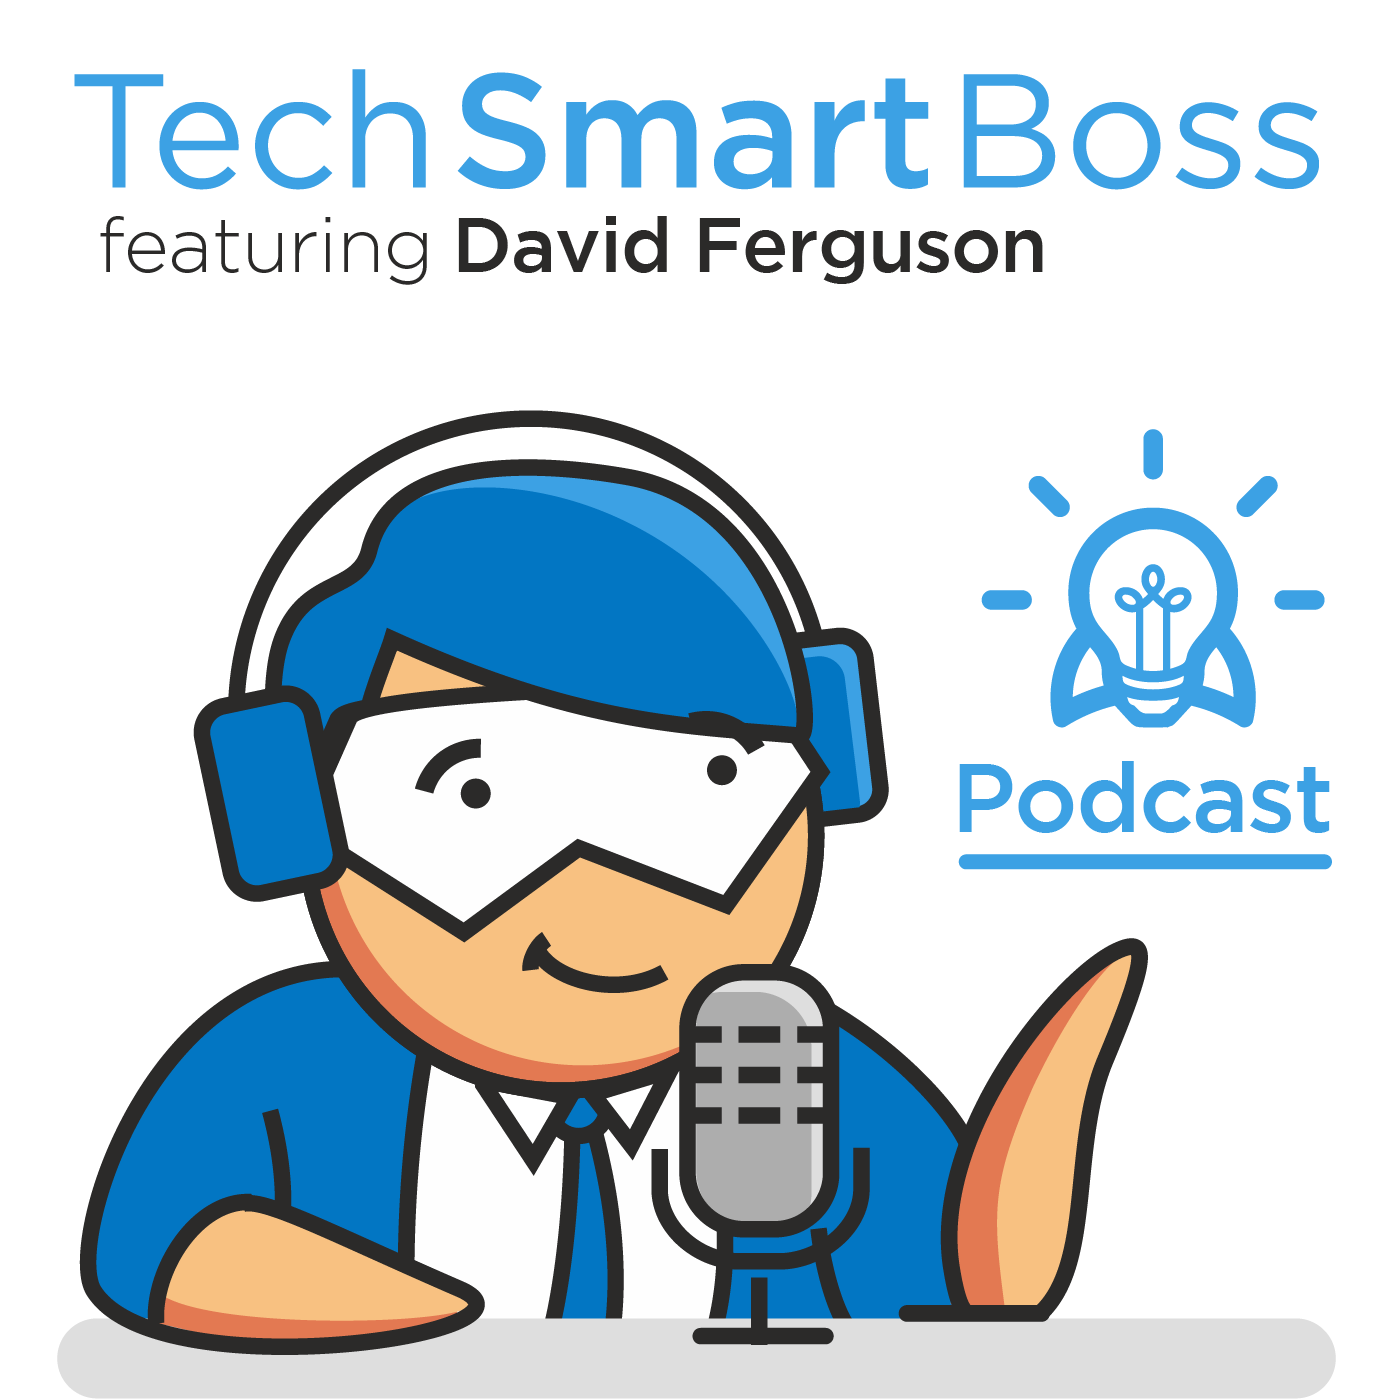 Episode 61: My Top 12 Cyber Security Tips for the Tech Smart Boss